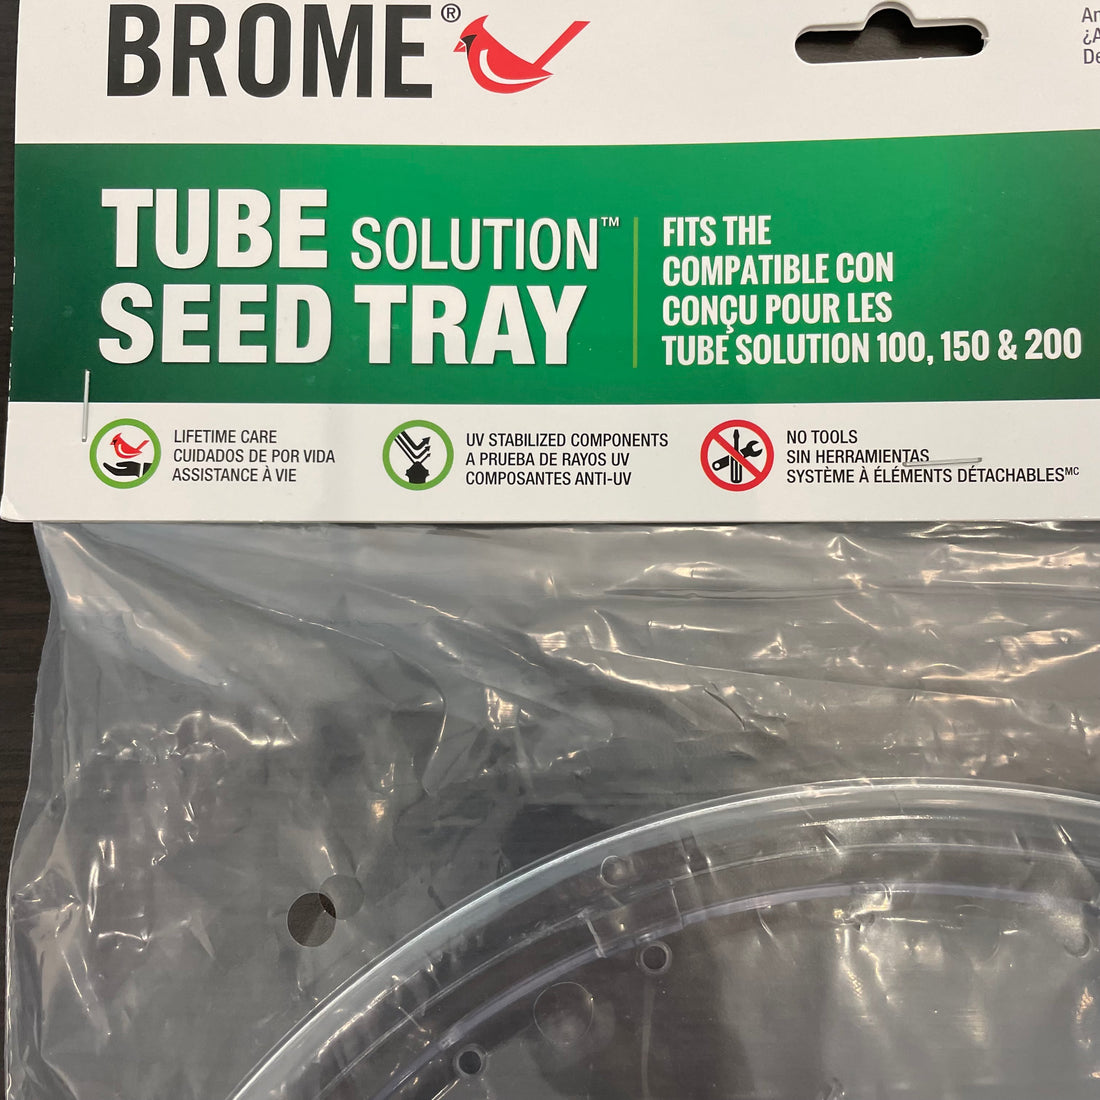 Brome Tube Solution Seed Tray